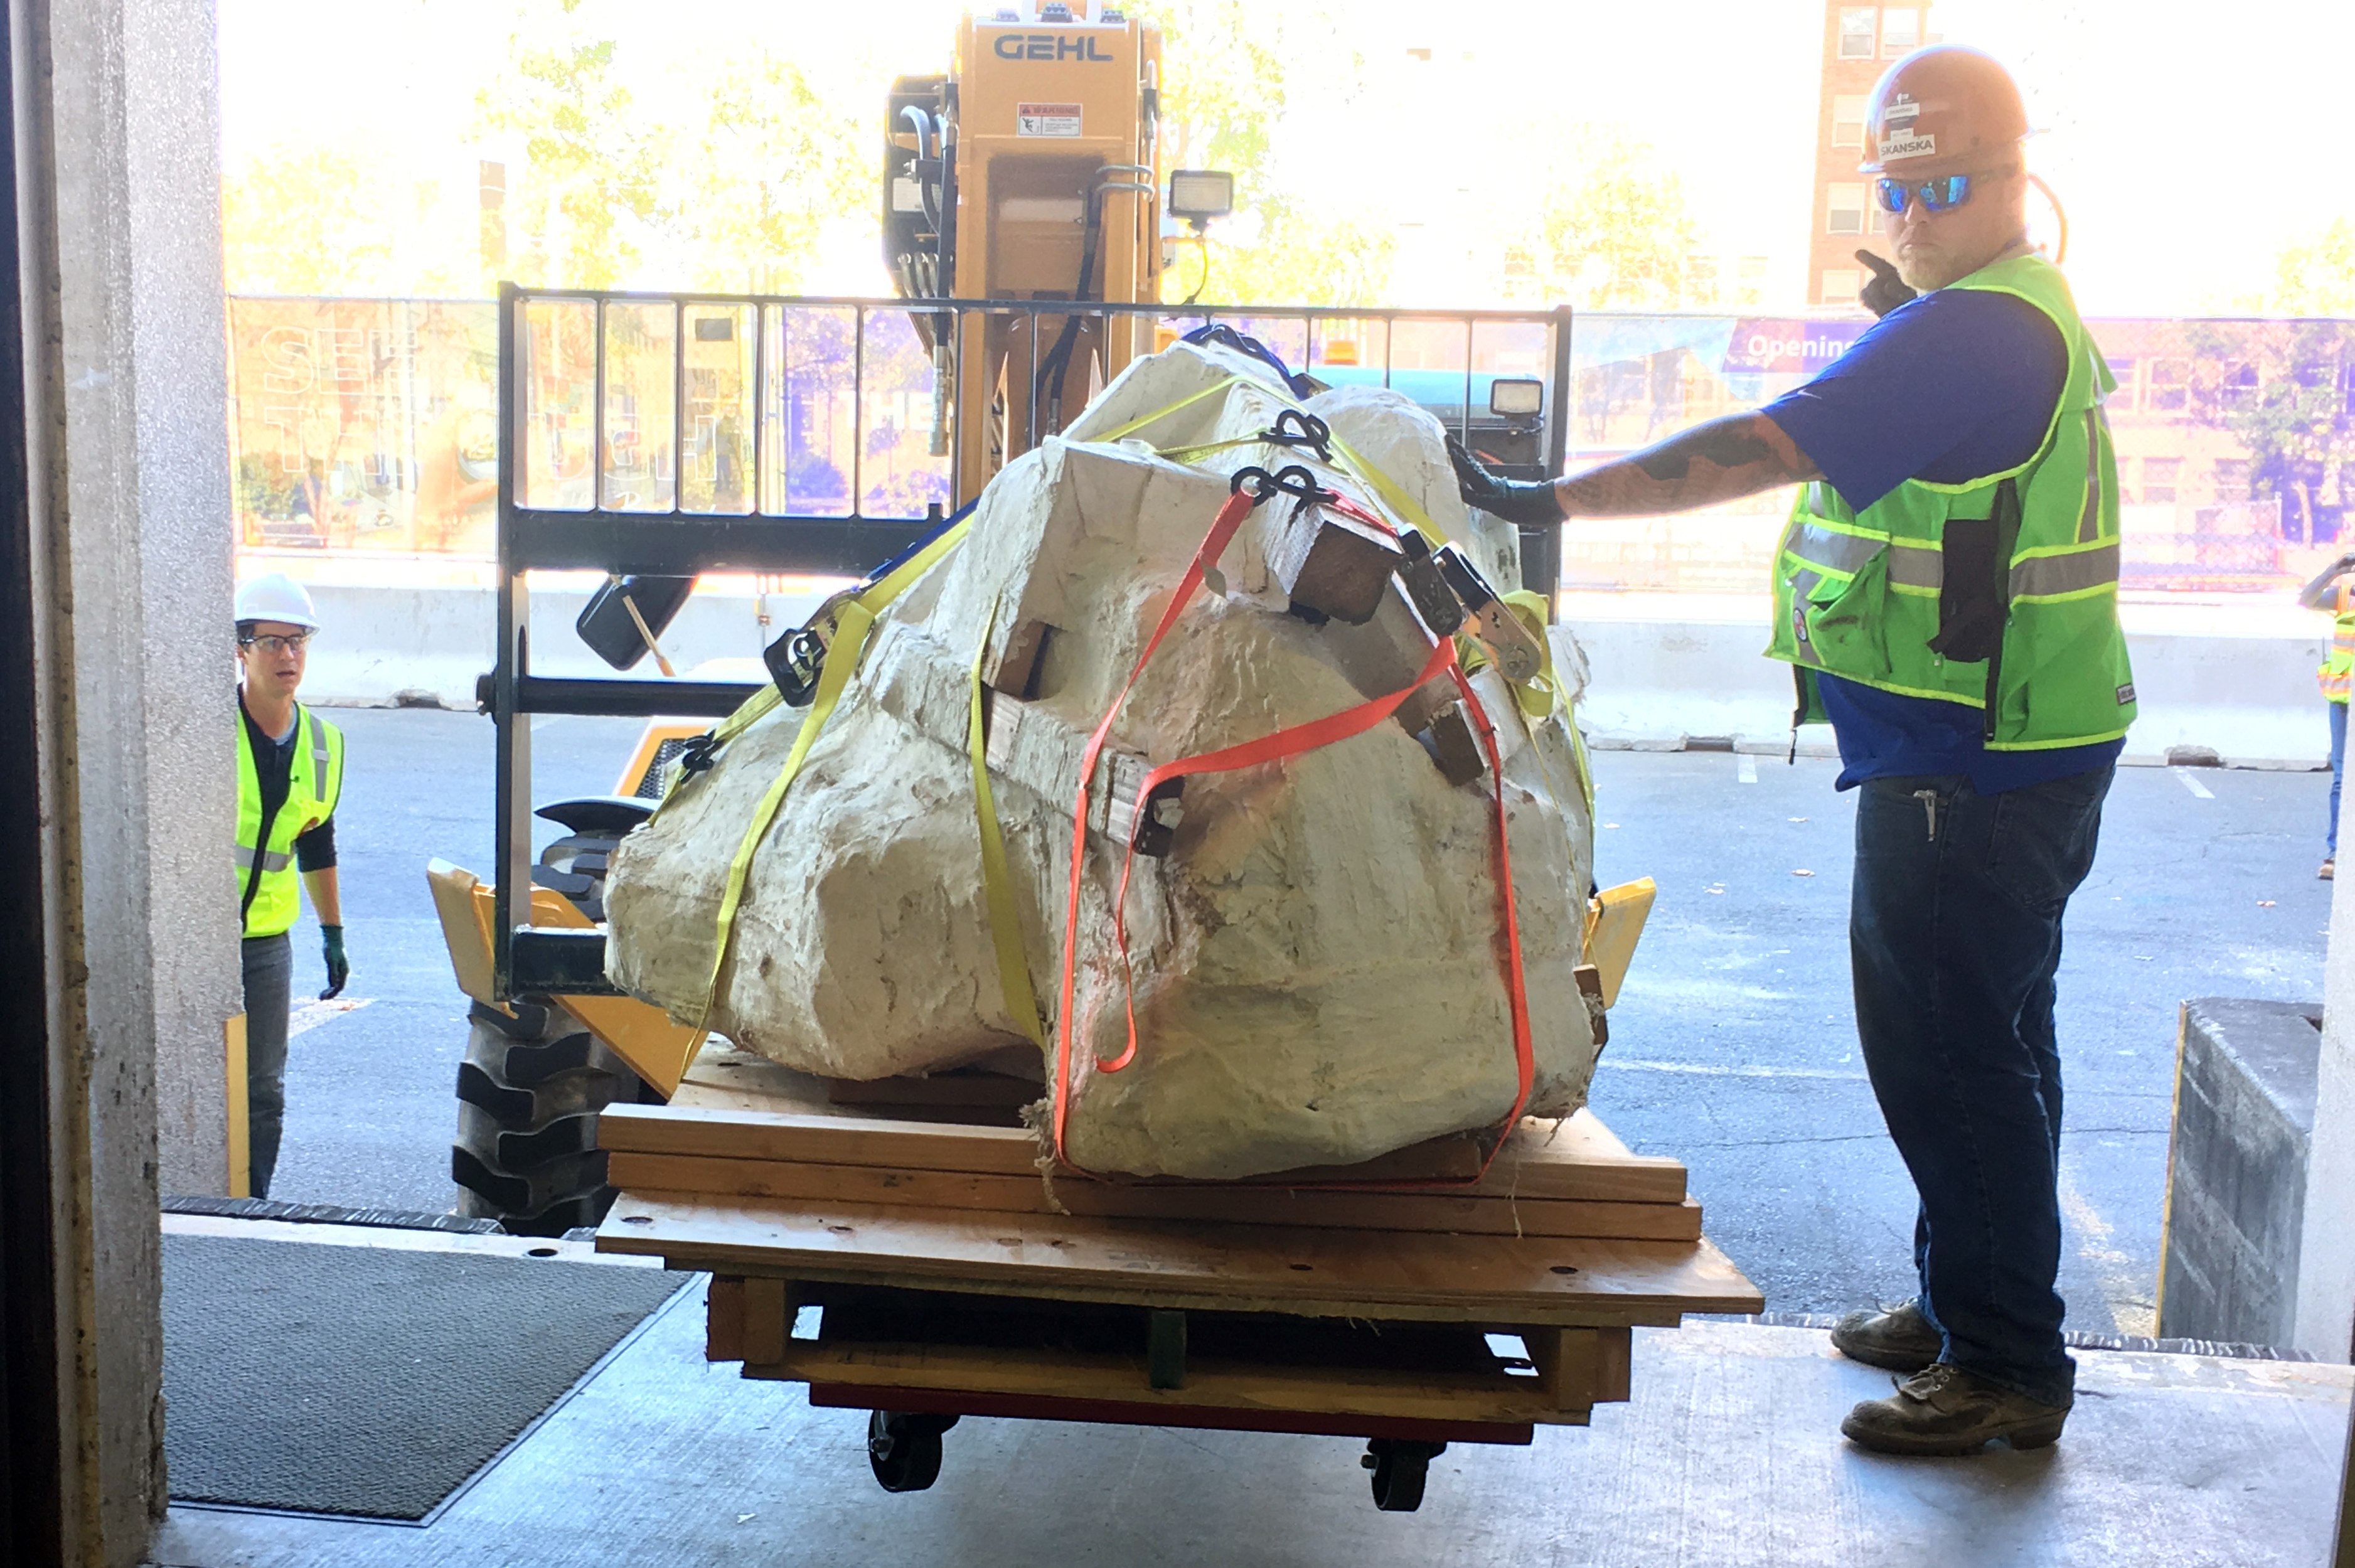 Burke Museum paleontologists and crew members from Skanska carefully move the 3,500-pound T. rex skull using a forklift.  Credit: Photo courtesy Burke Museum